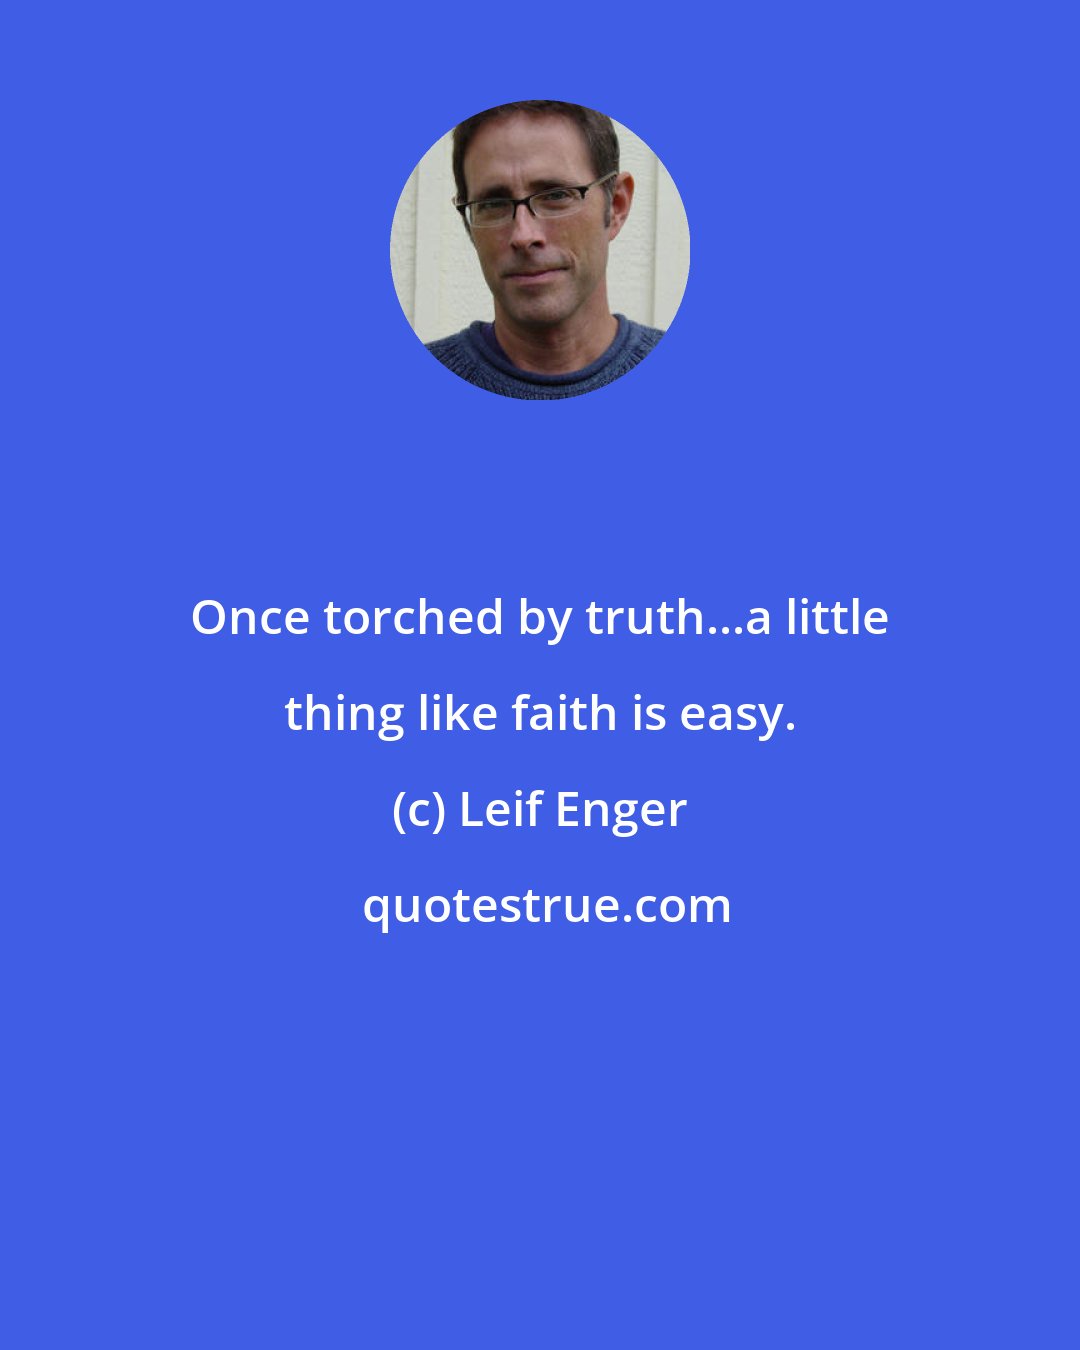 Leif Enger: Once torched by truth...a little thing like faith is easy.